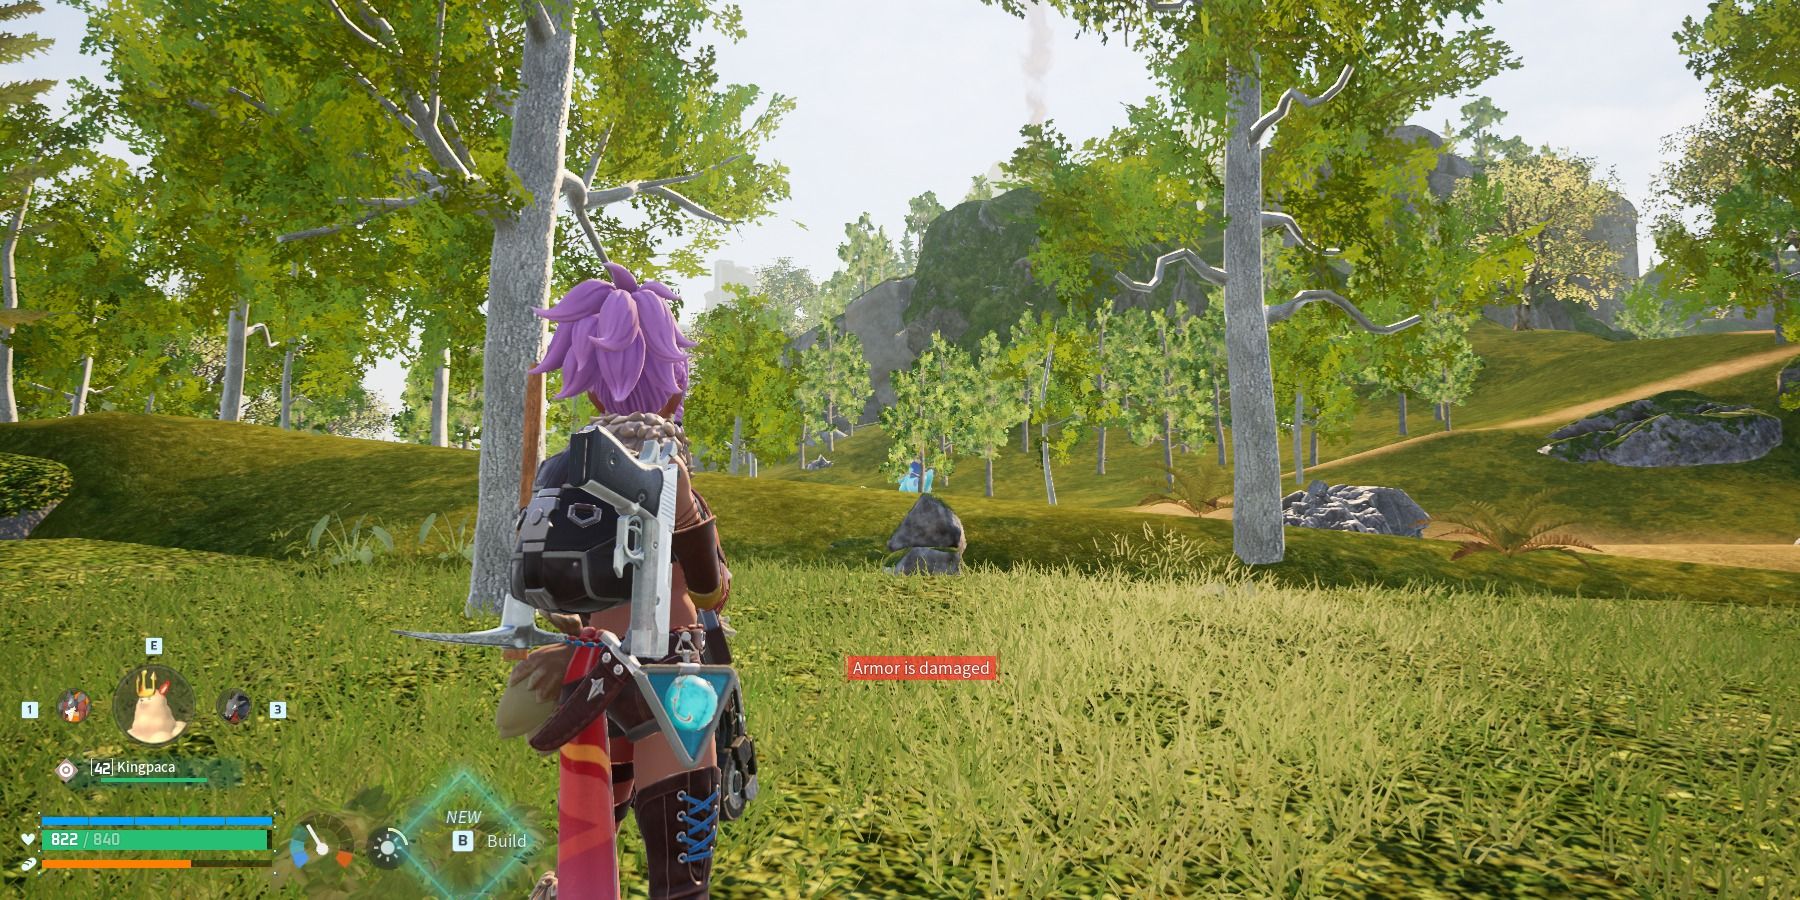 palworld character in bamboo groves location